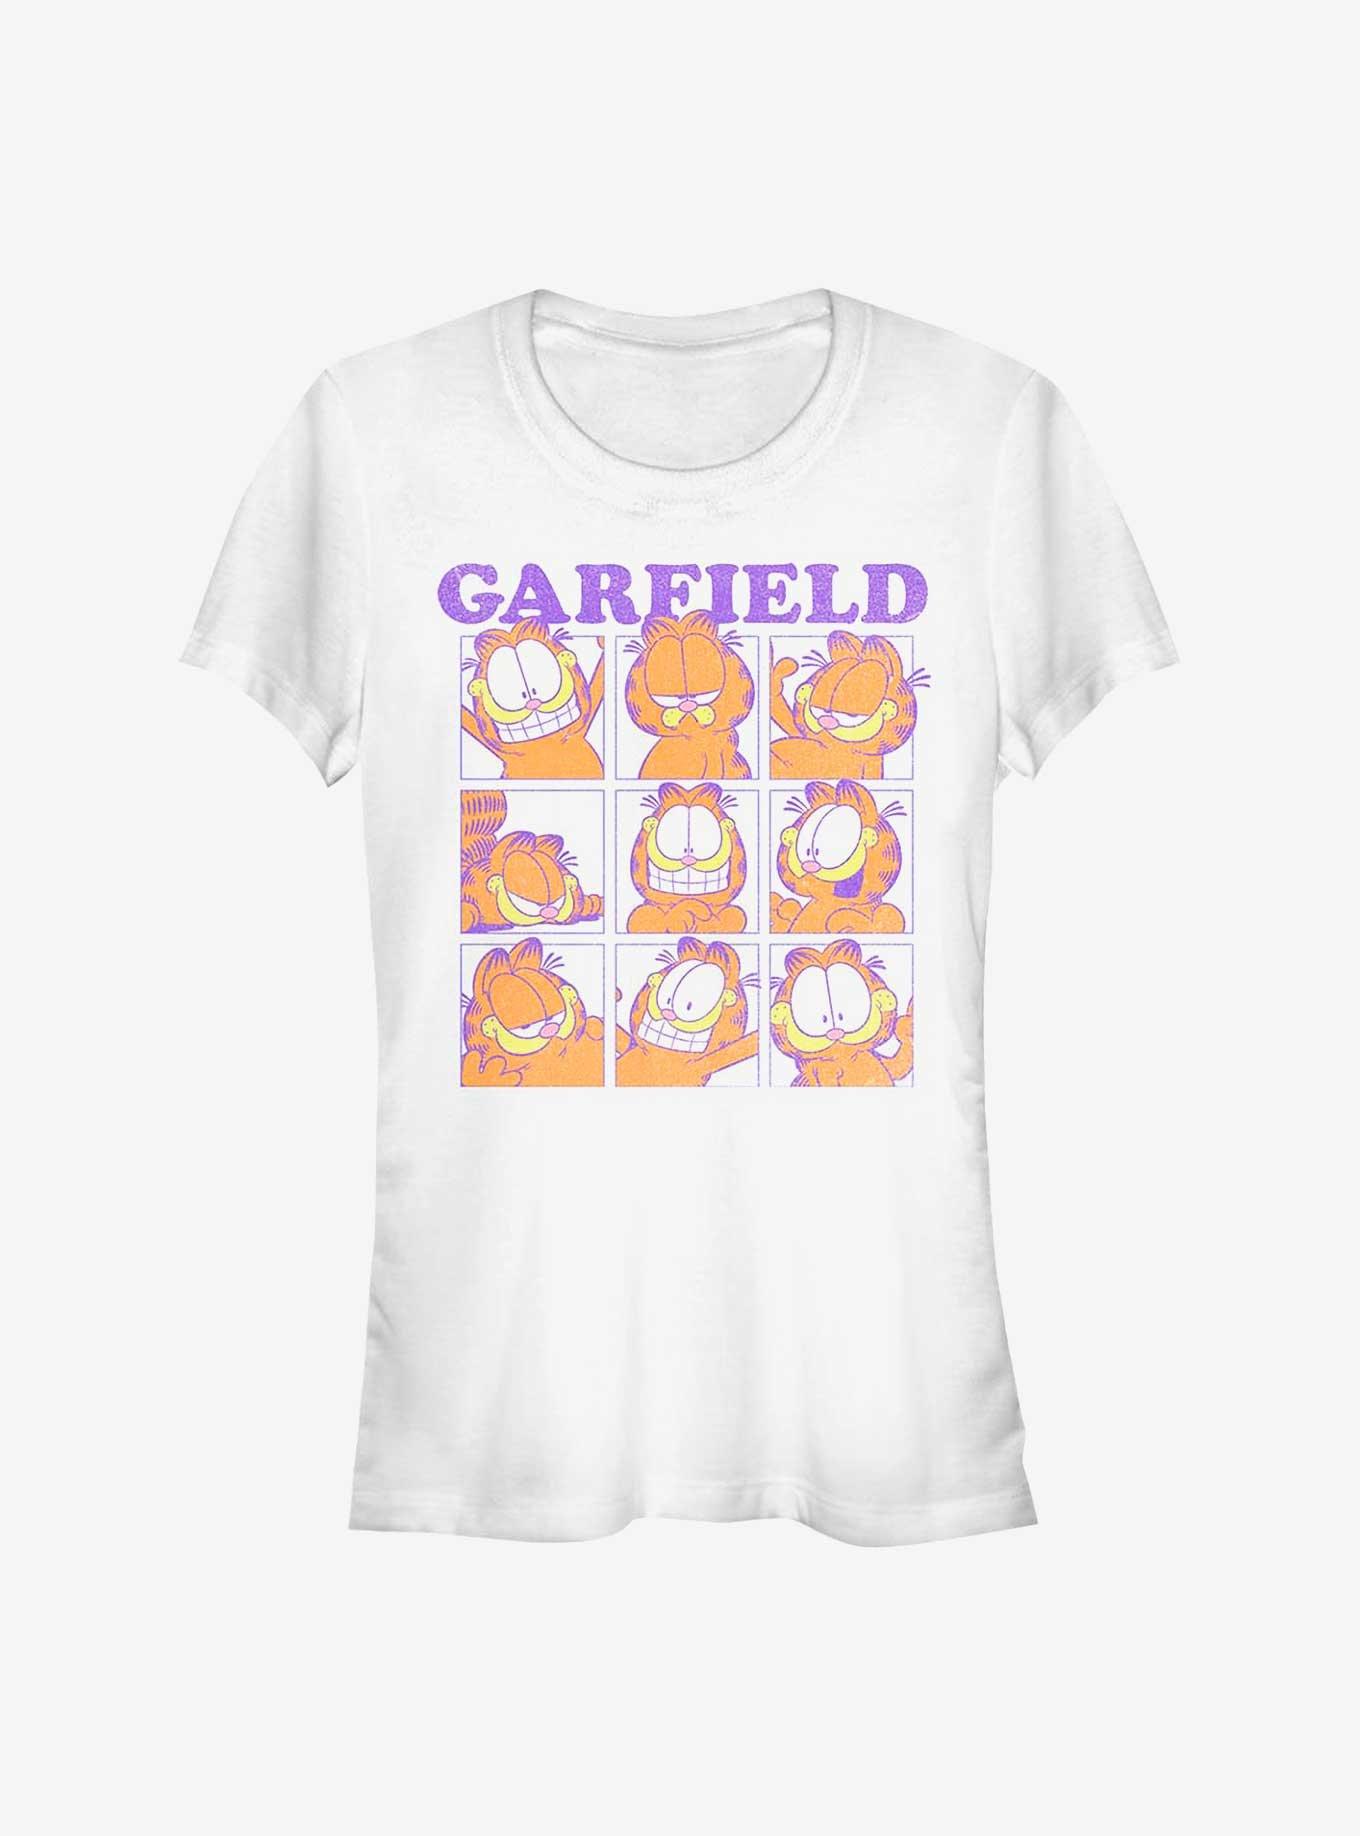 Garfield Many Faces of Girls T-Shirt